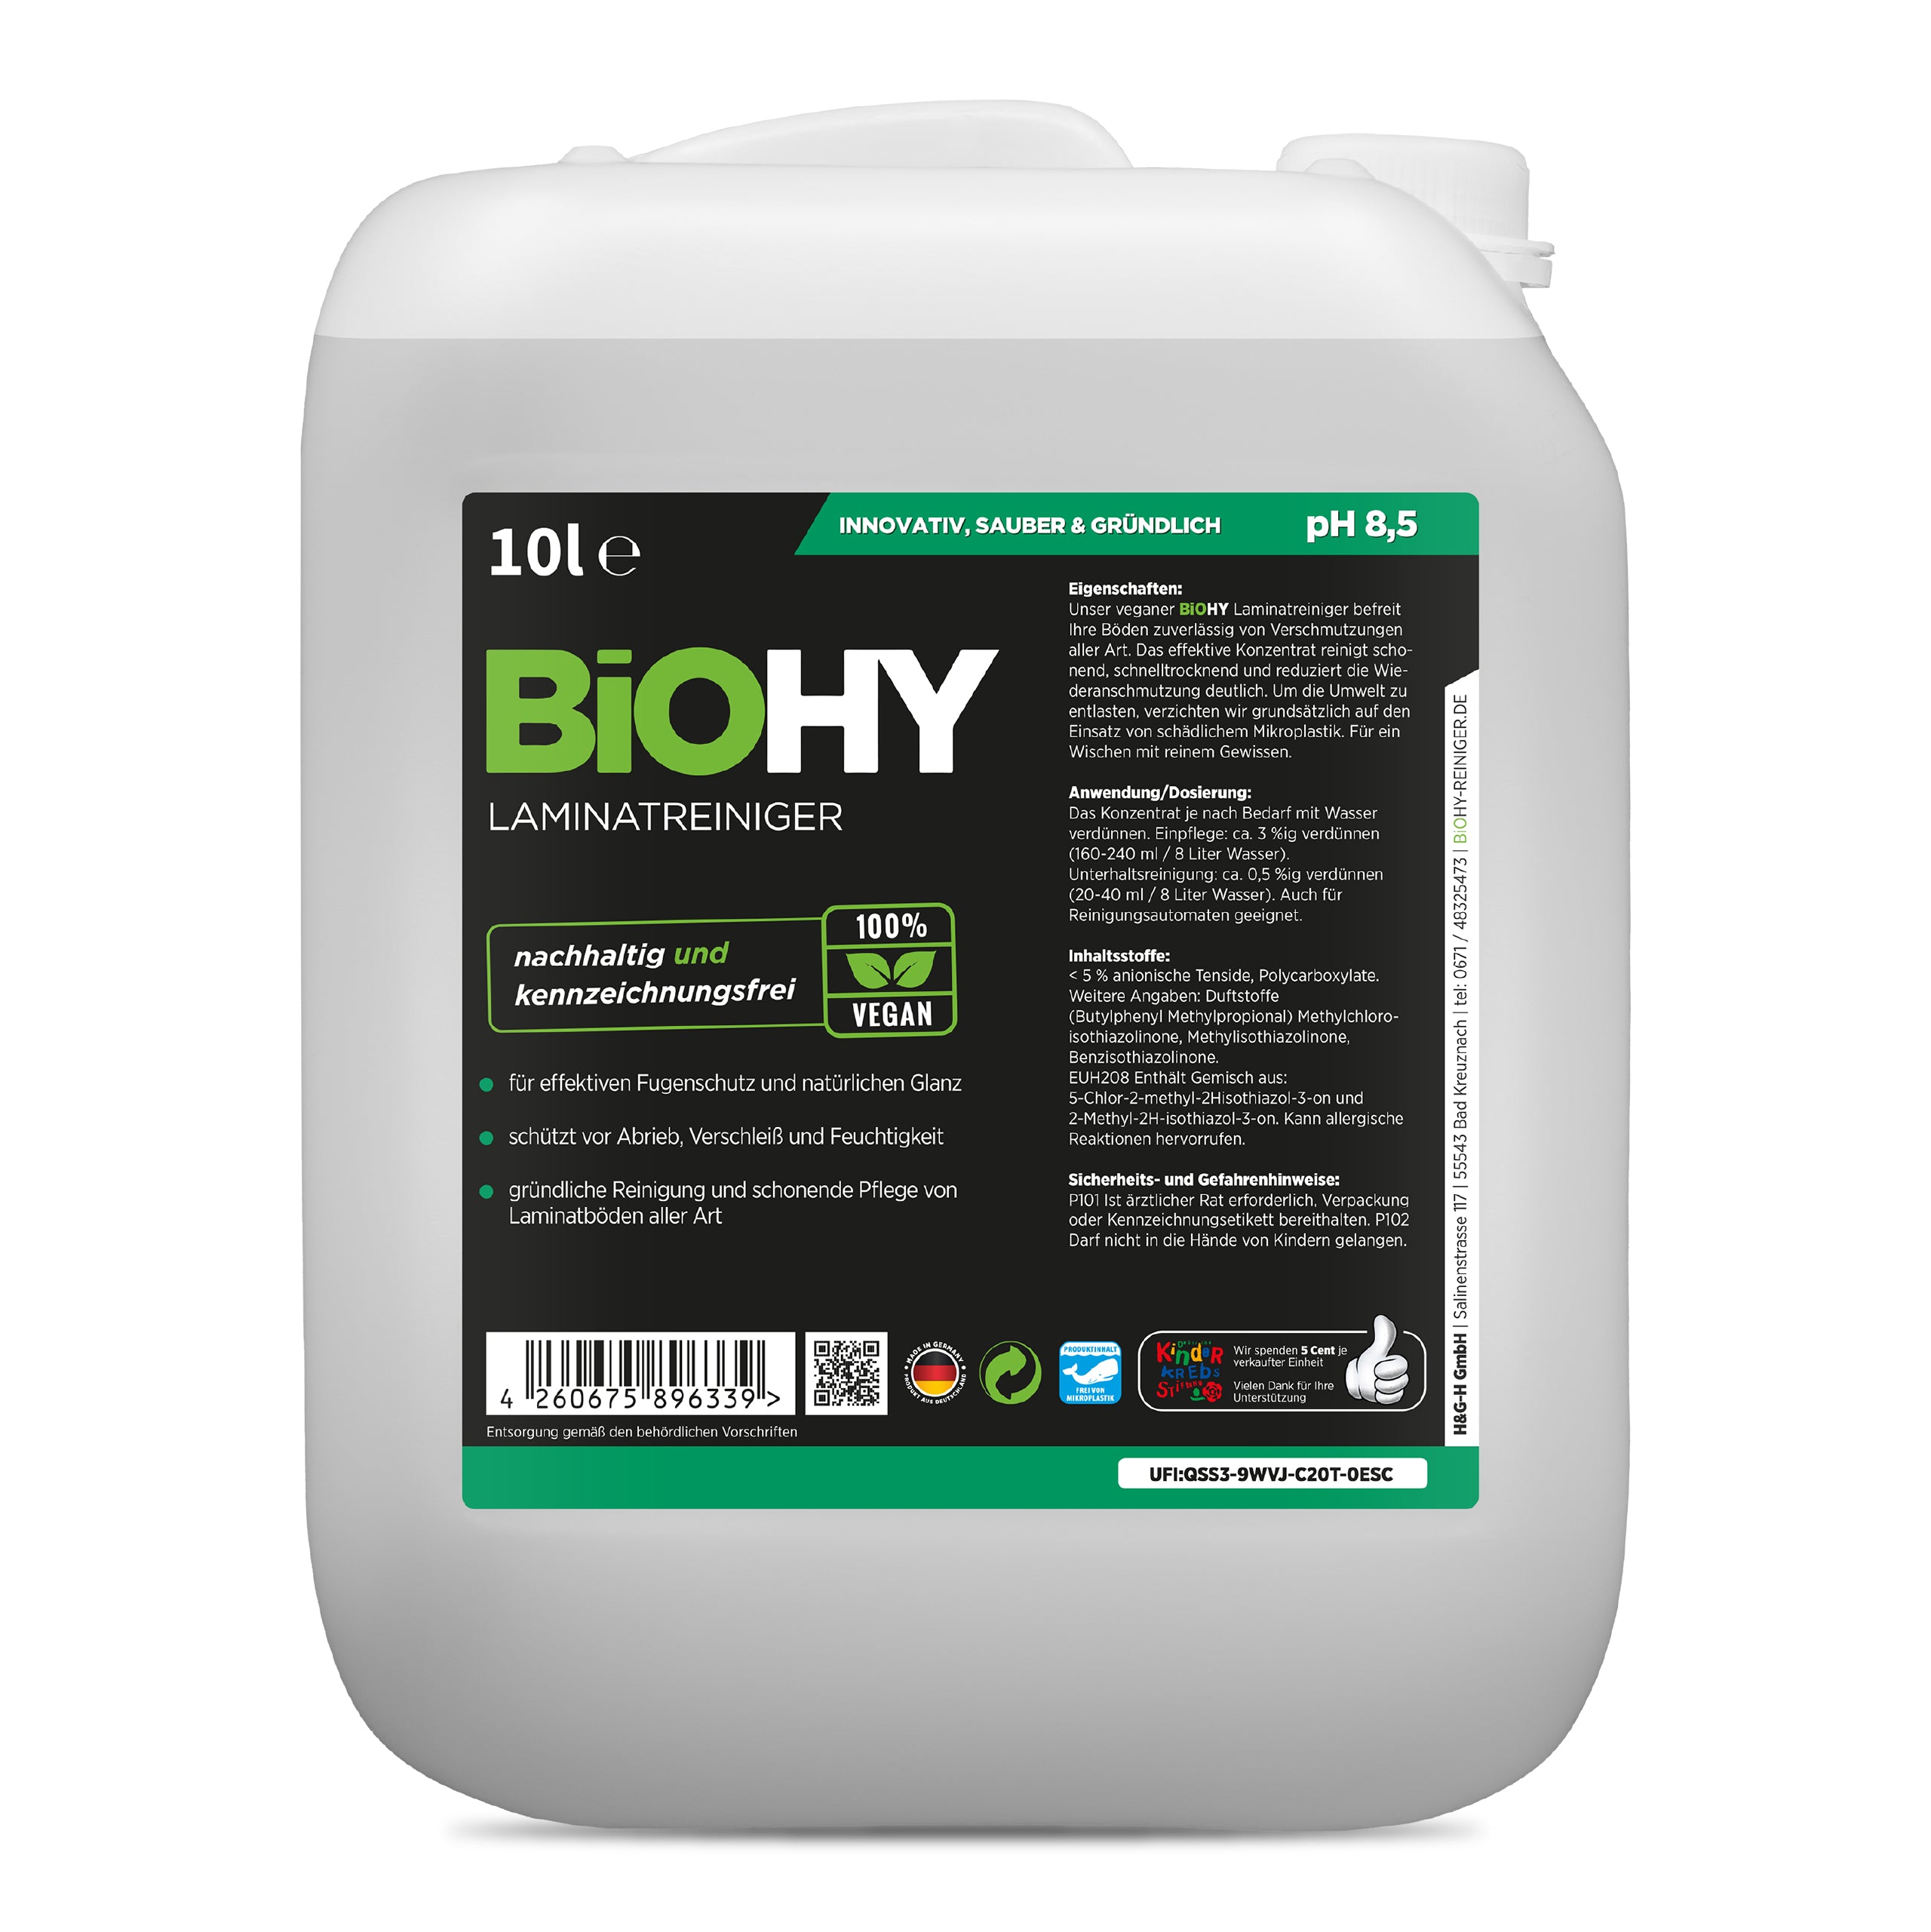 BiOHY laminate cleaner, laminate care, vinyl cleaner, laminate care products